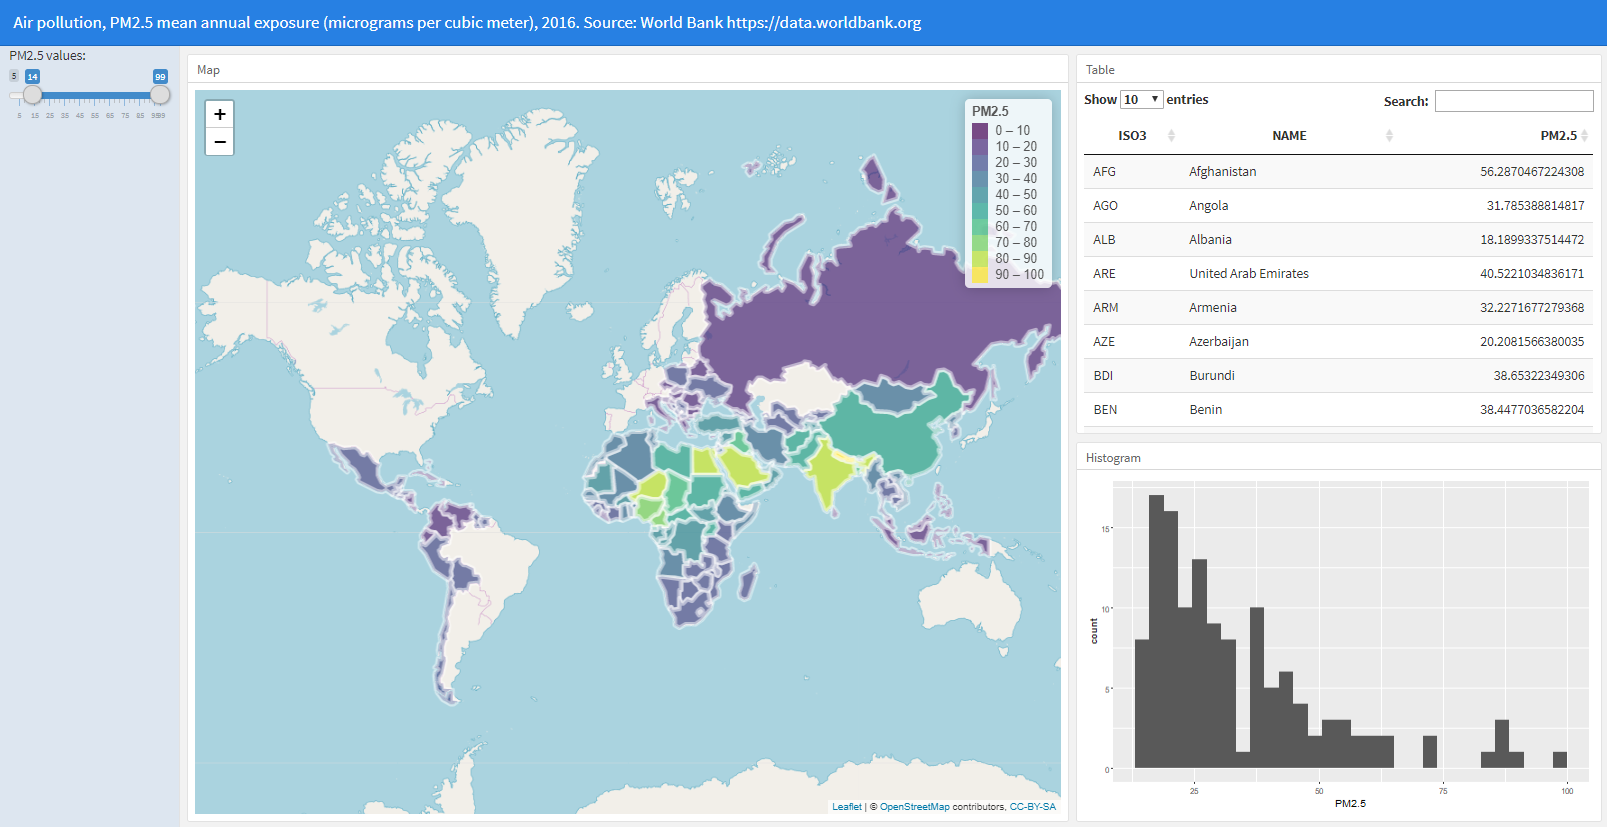 Snapshot of the interactive dashboard to visualize air pollution data.